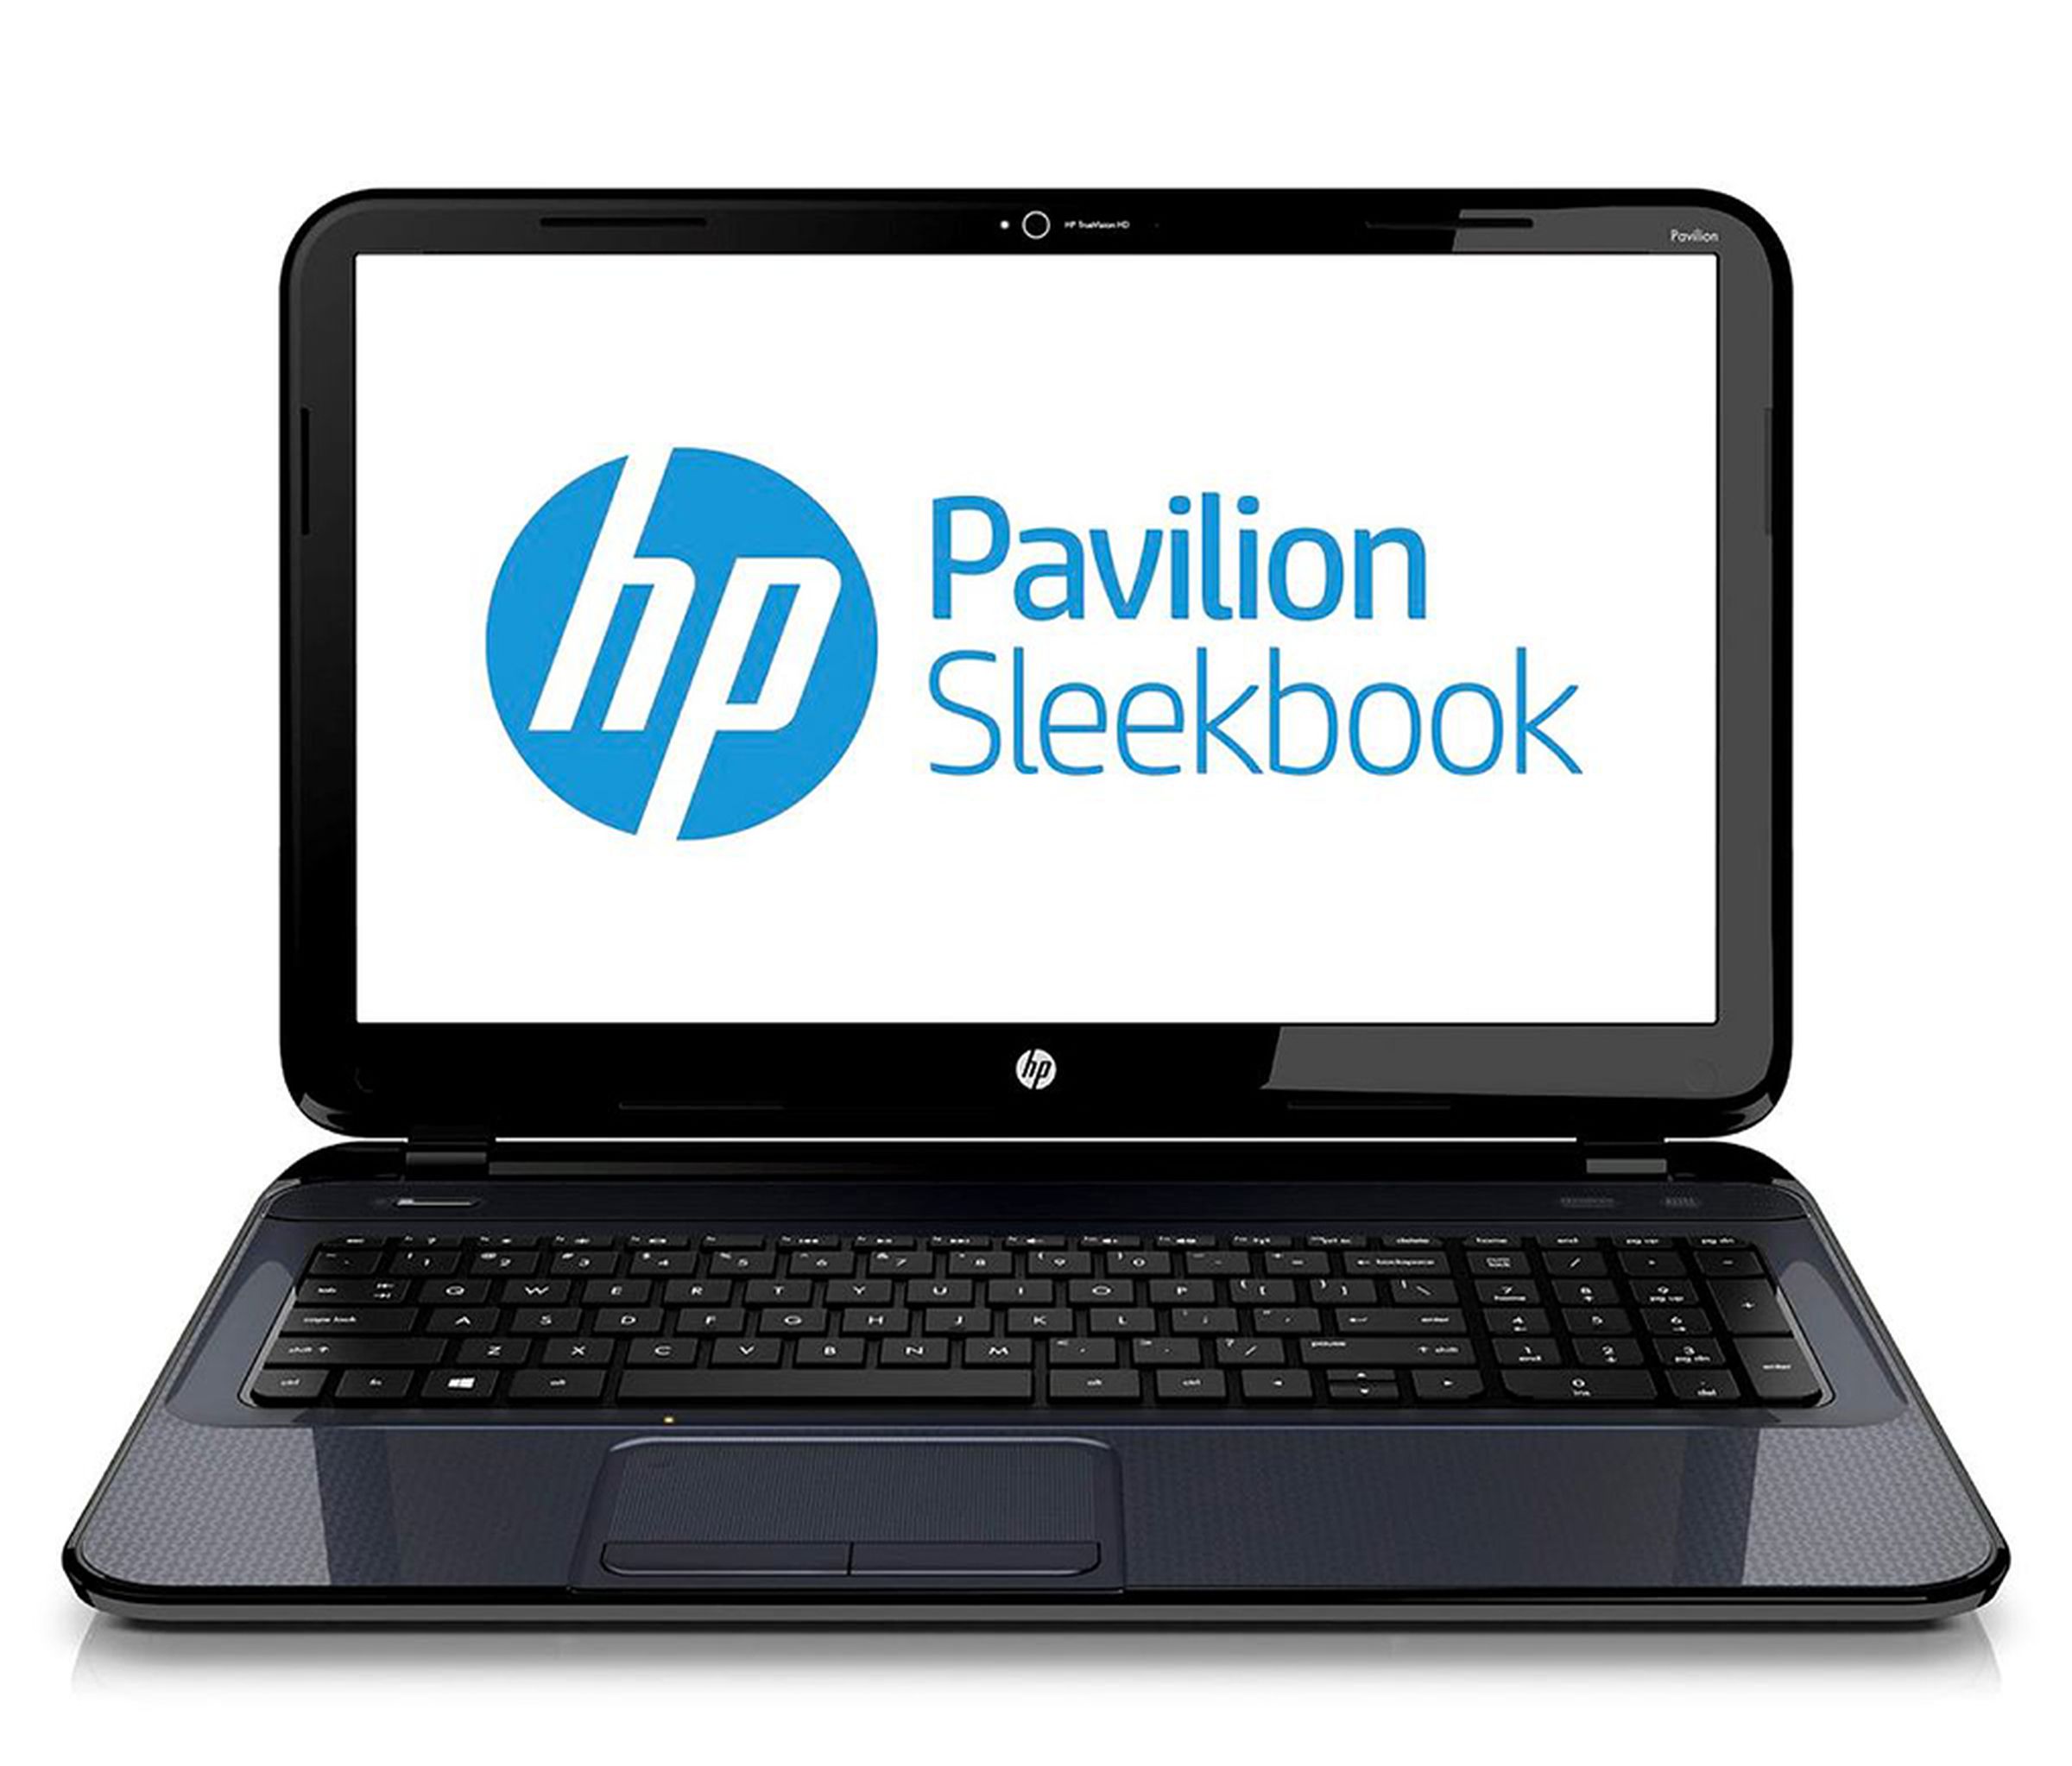 HP Pavilion TouchSmart Sleekbook and Pavilion Sleekbook hands-on and press pictures 